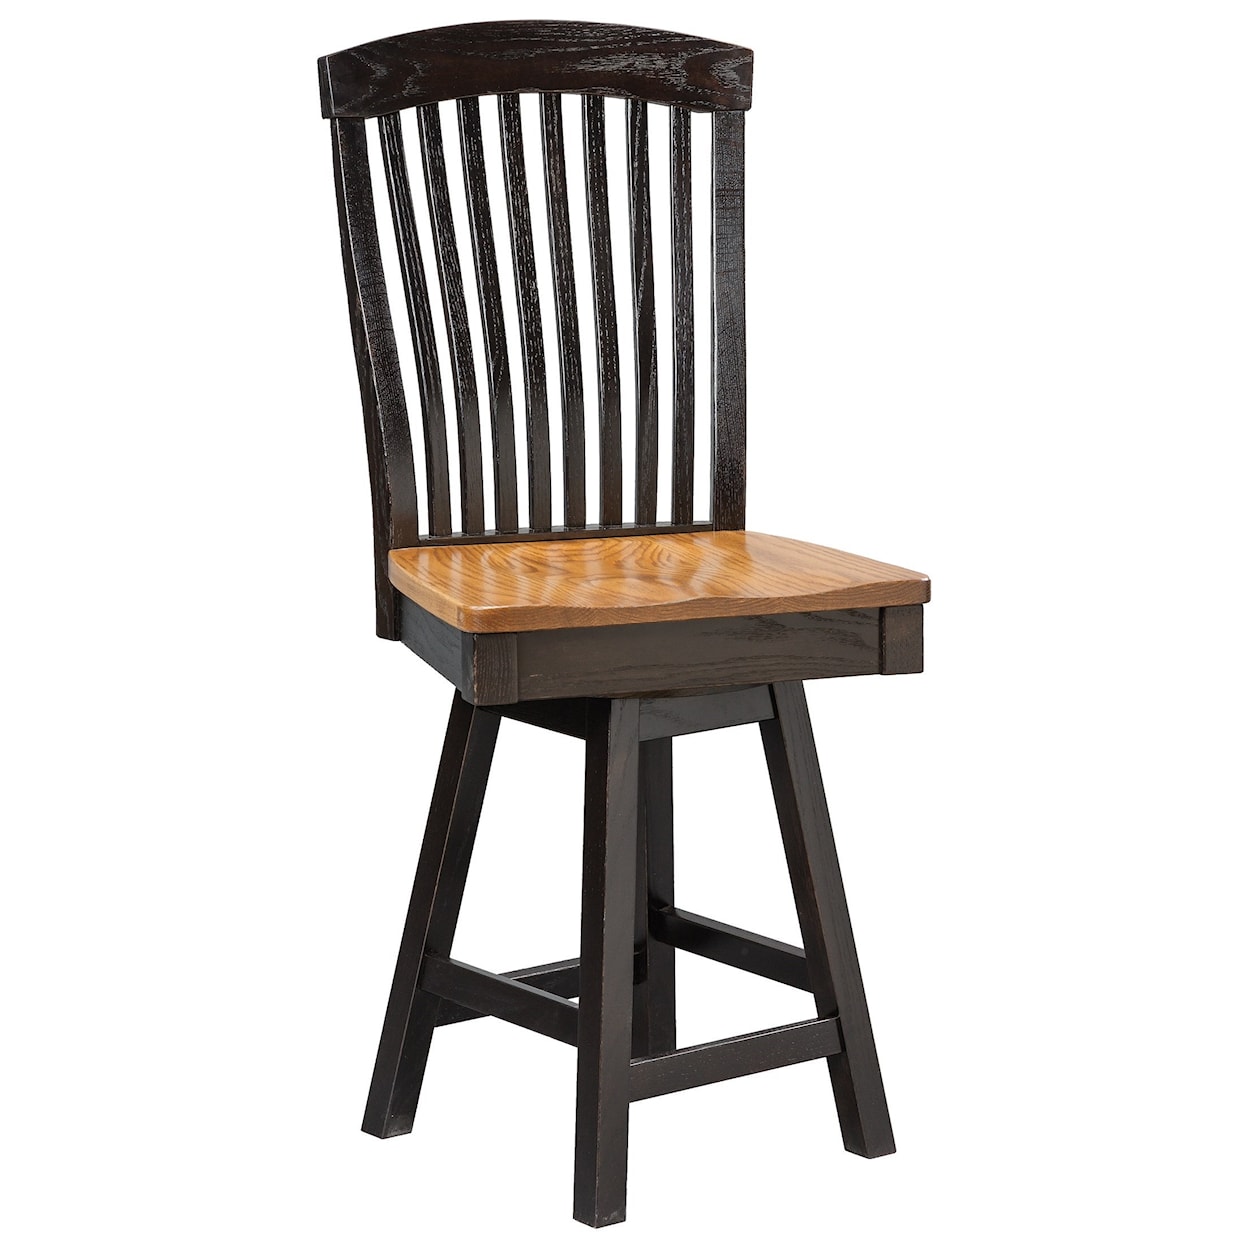 Daniel's Amish Chairs and Barstools Empire Swivel Counter Chair